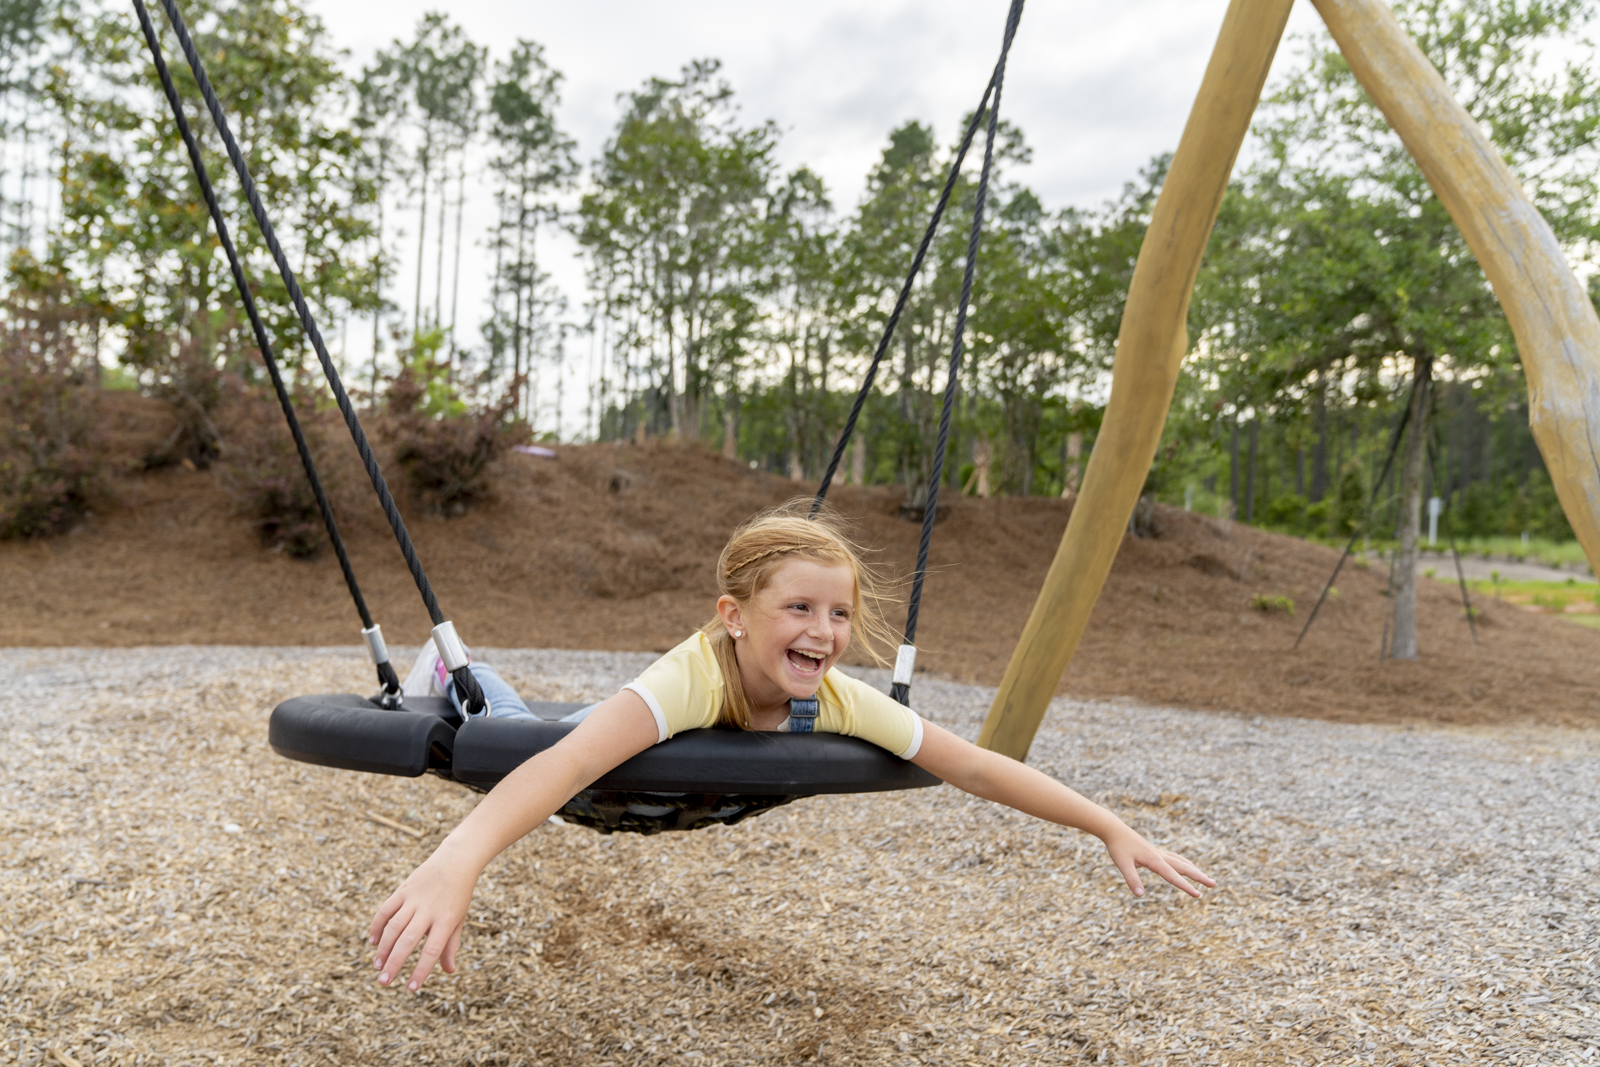 A young girl is swinging on a swing.